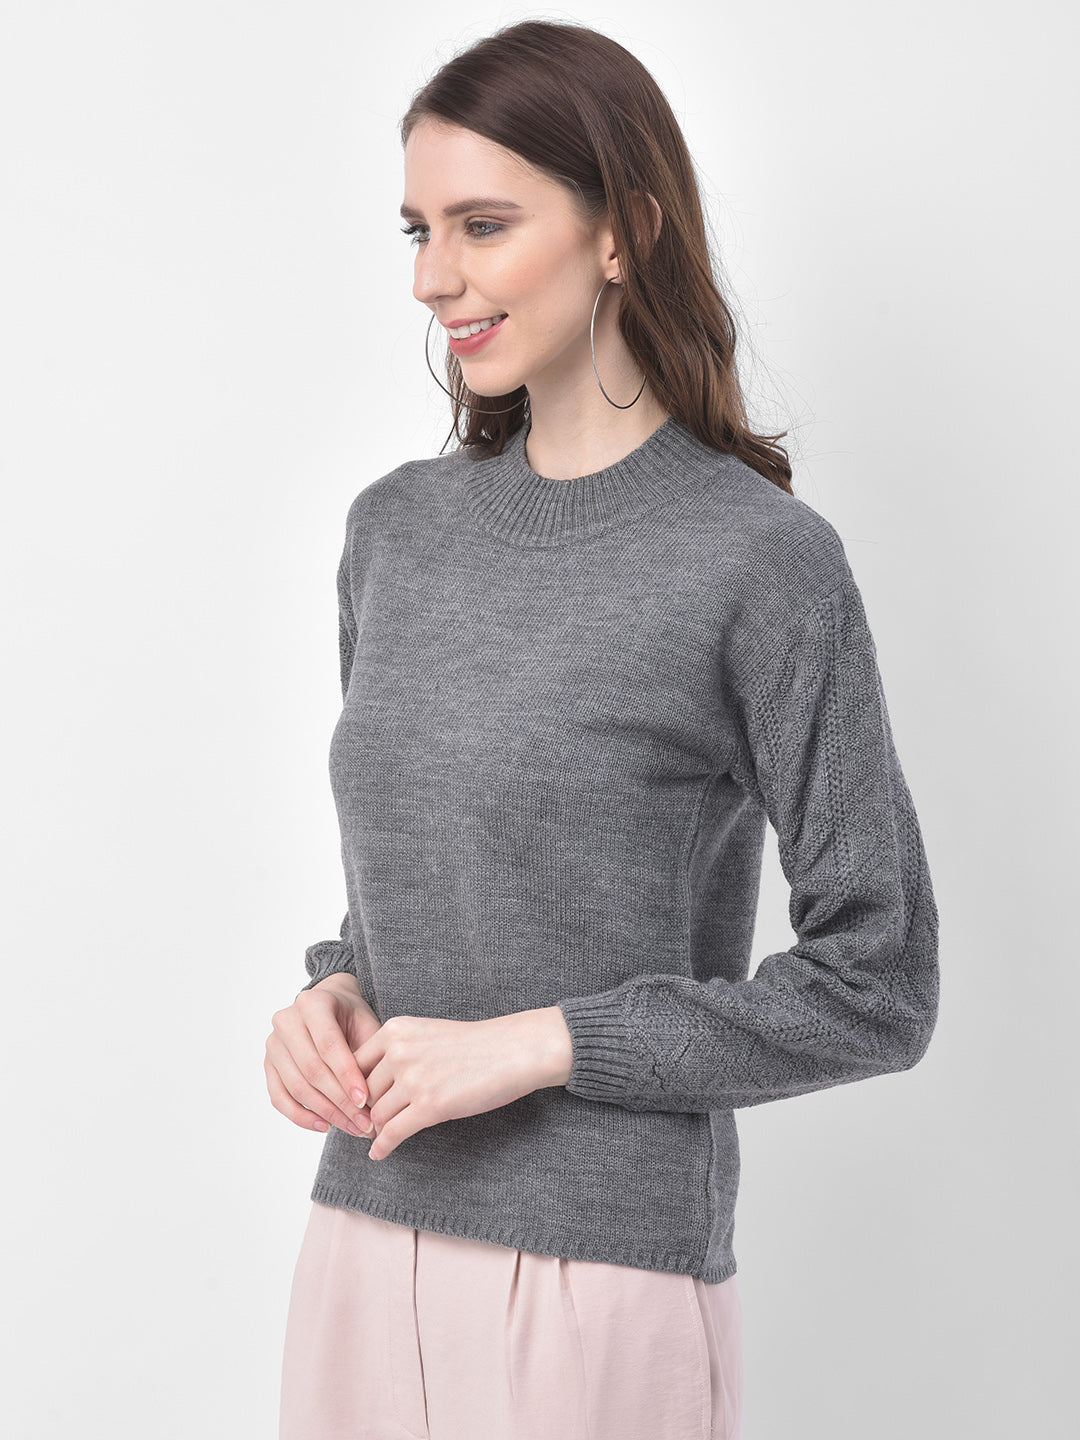 Sweater With Sleeve Cable Design